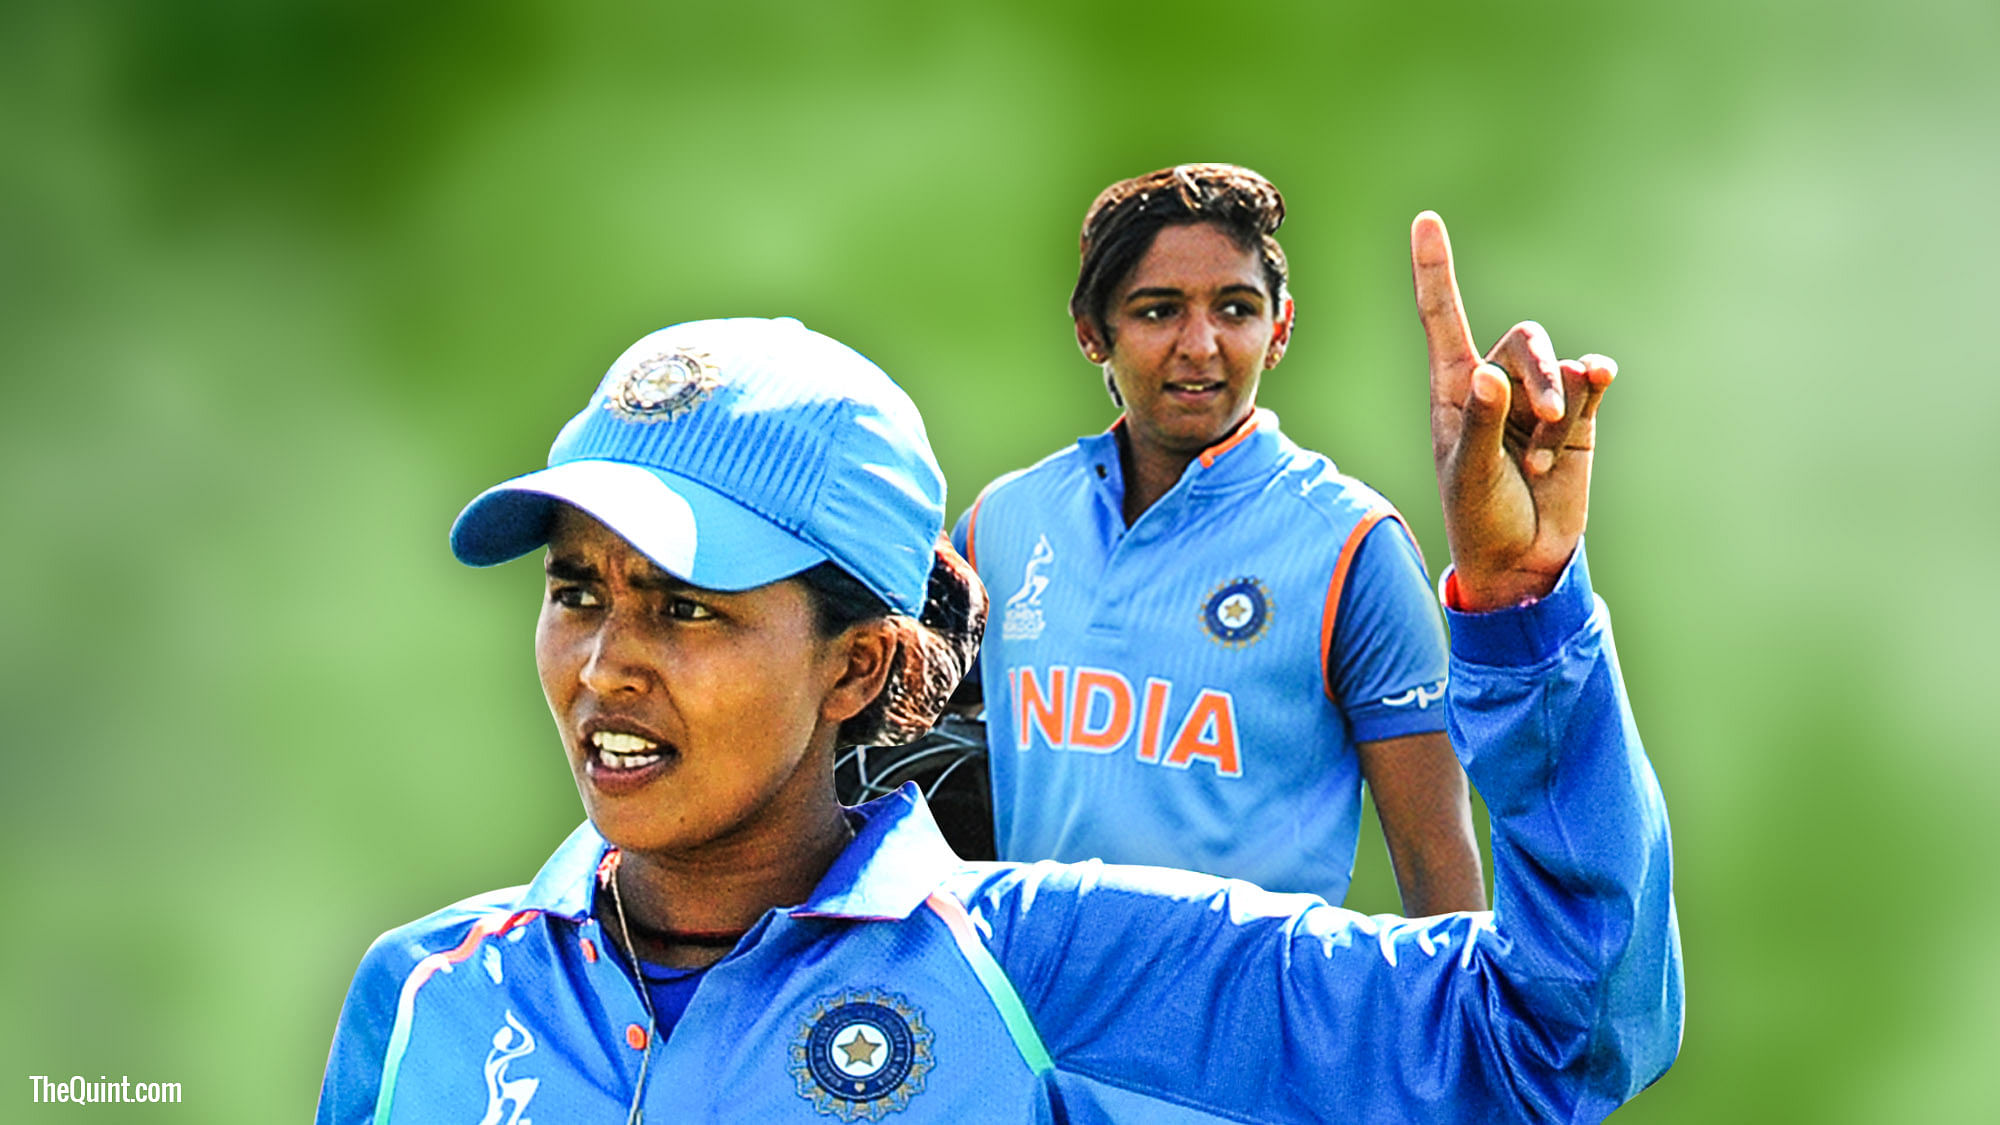  Harmanpreet Kaur feels that the mindset of the players have changed and that has seen the scoring rate also go up in the women’s game.